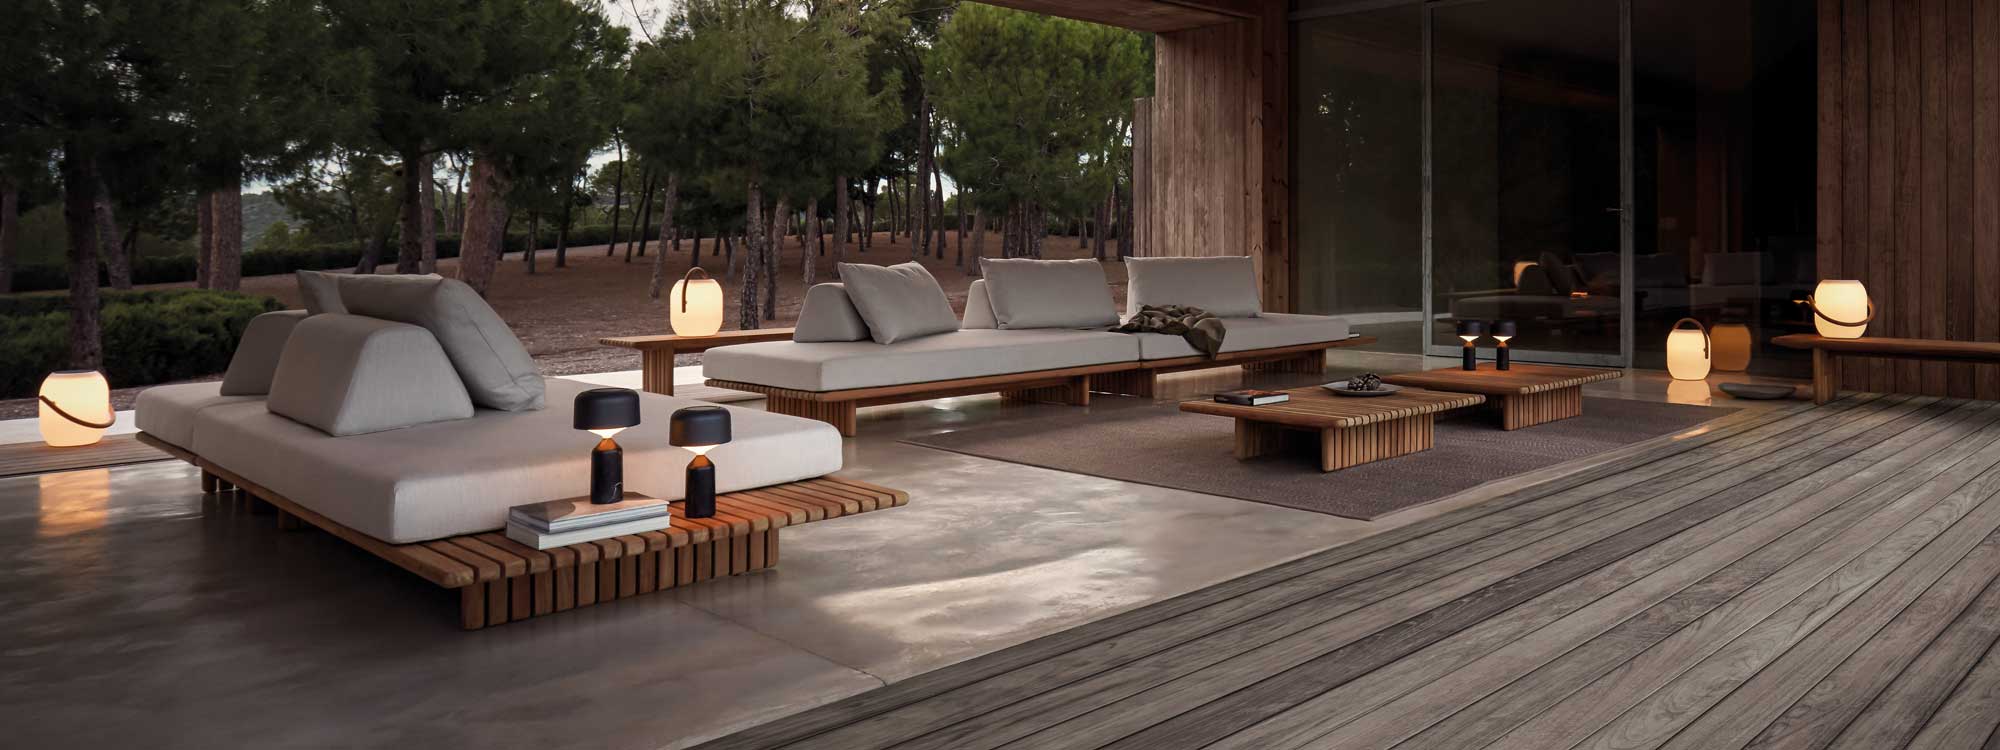 Image of Deck modern teak garden sofa and daybeds with Pebble outdoor lights by Gloster